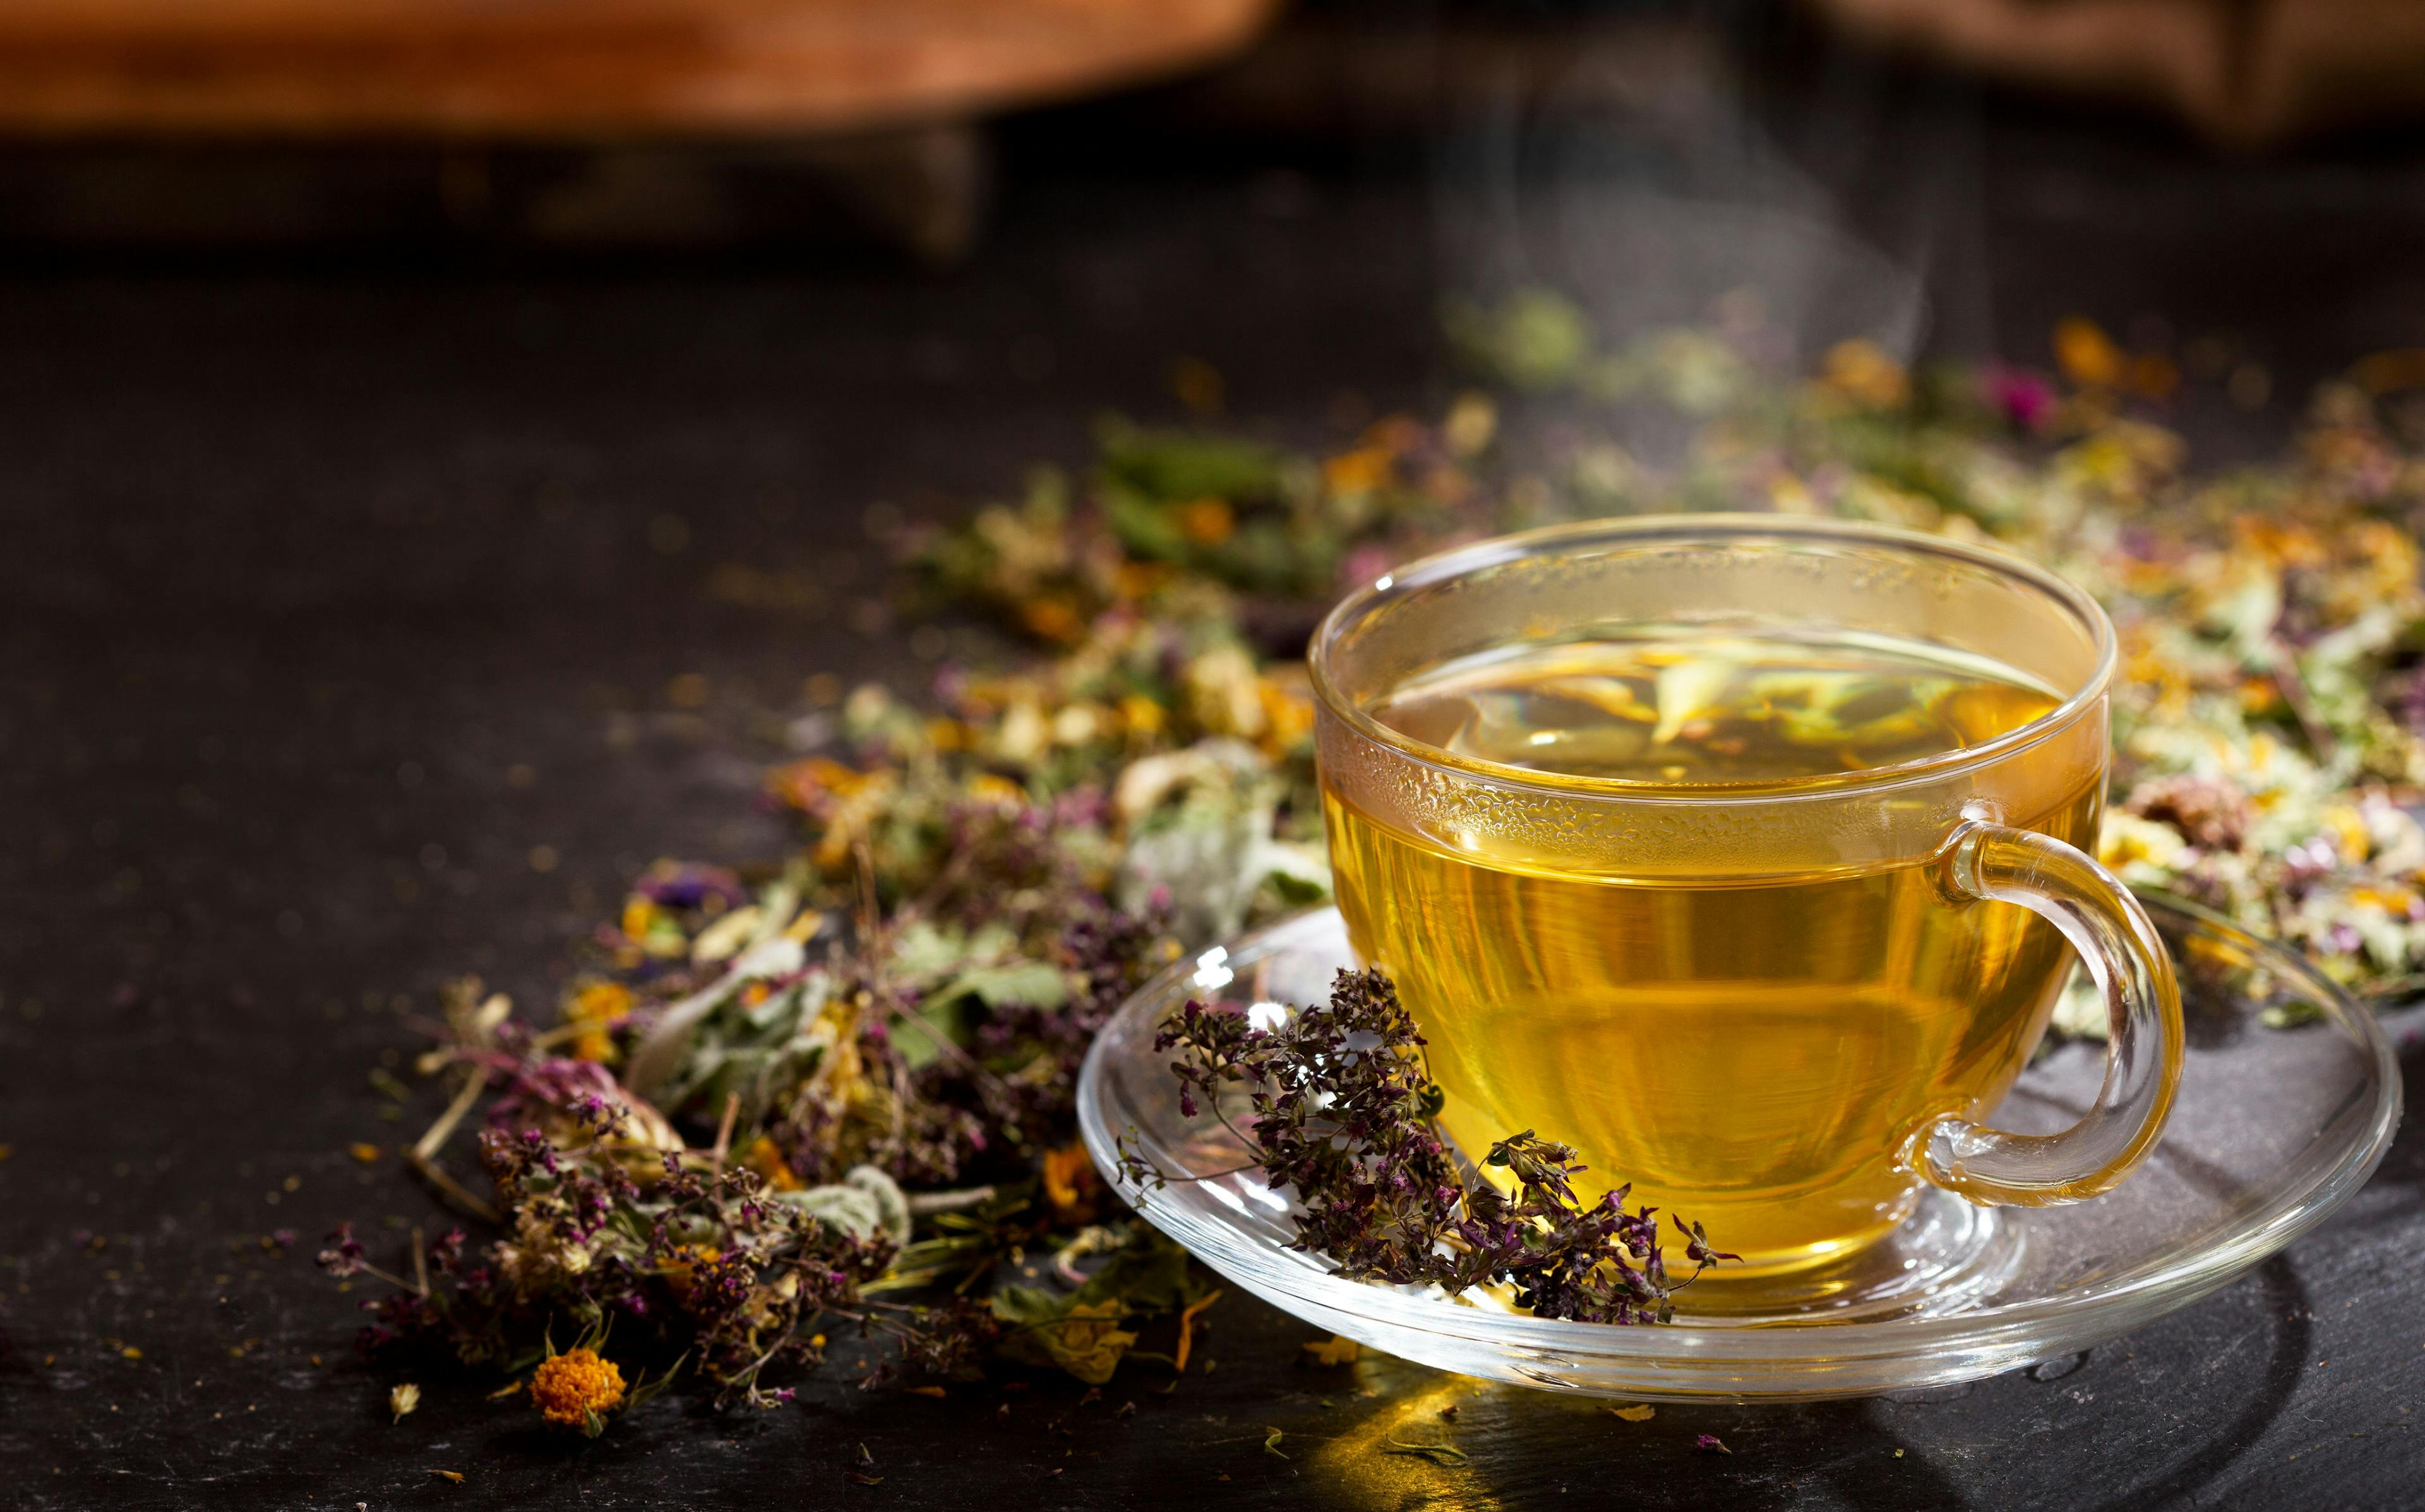 Cup of herbal tea with various herbs | Image Credit: © Nitr - stock.adobe.com